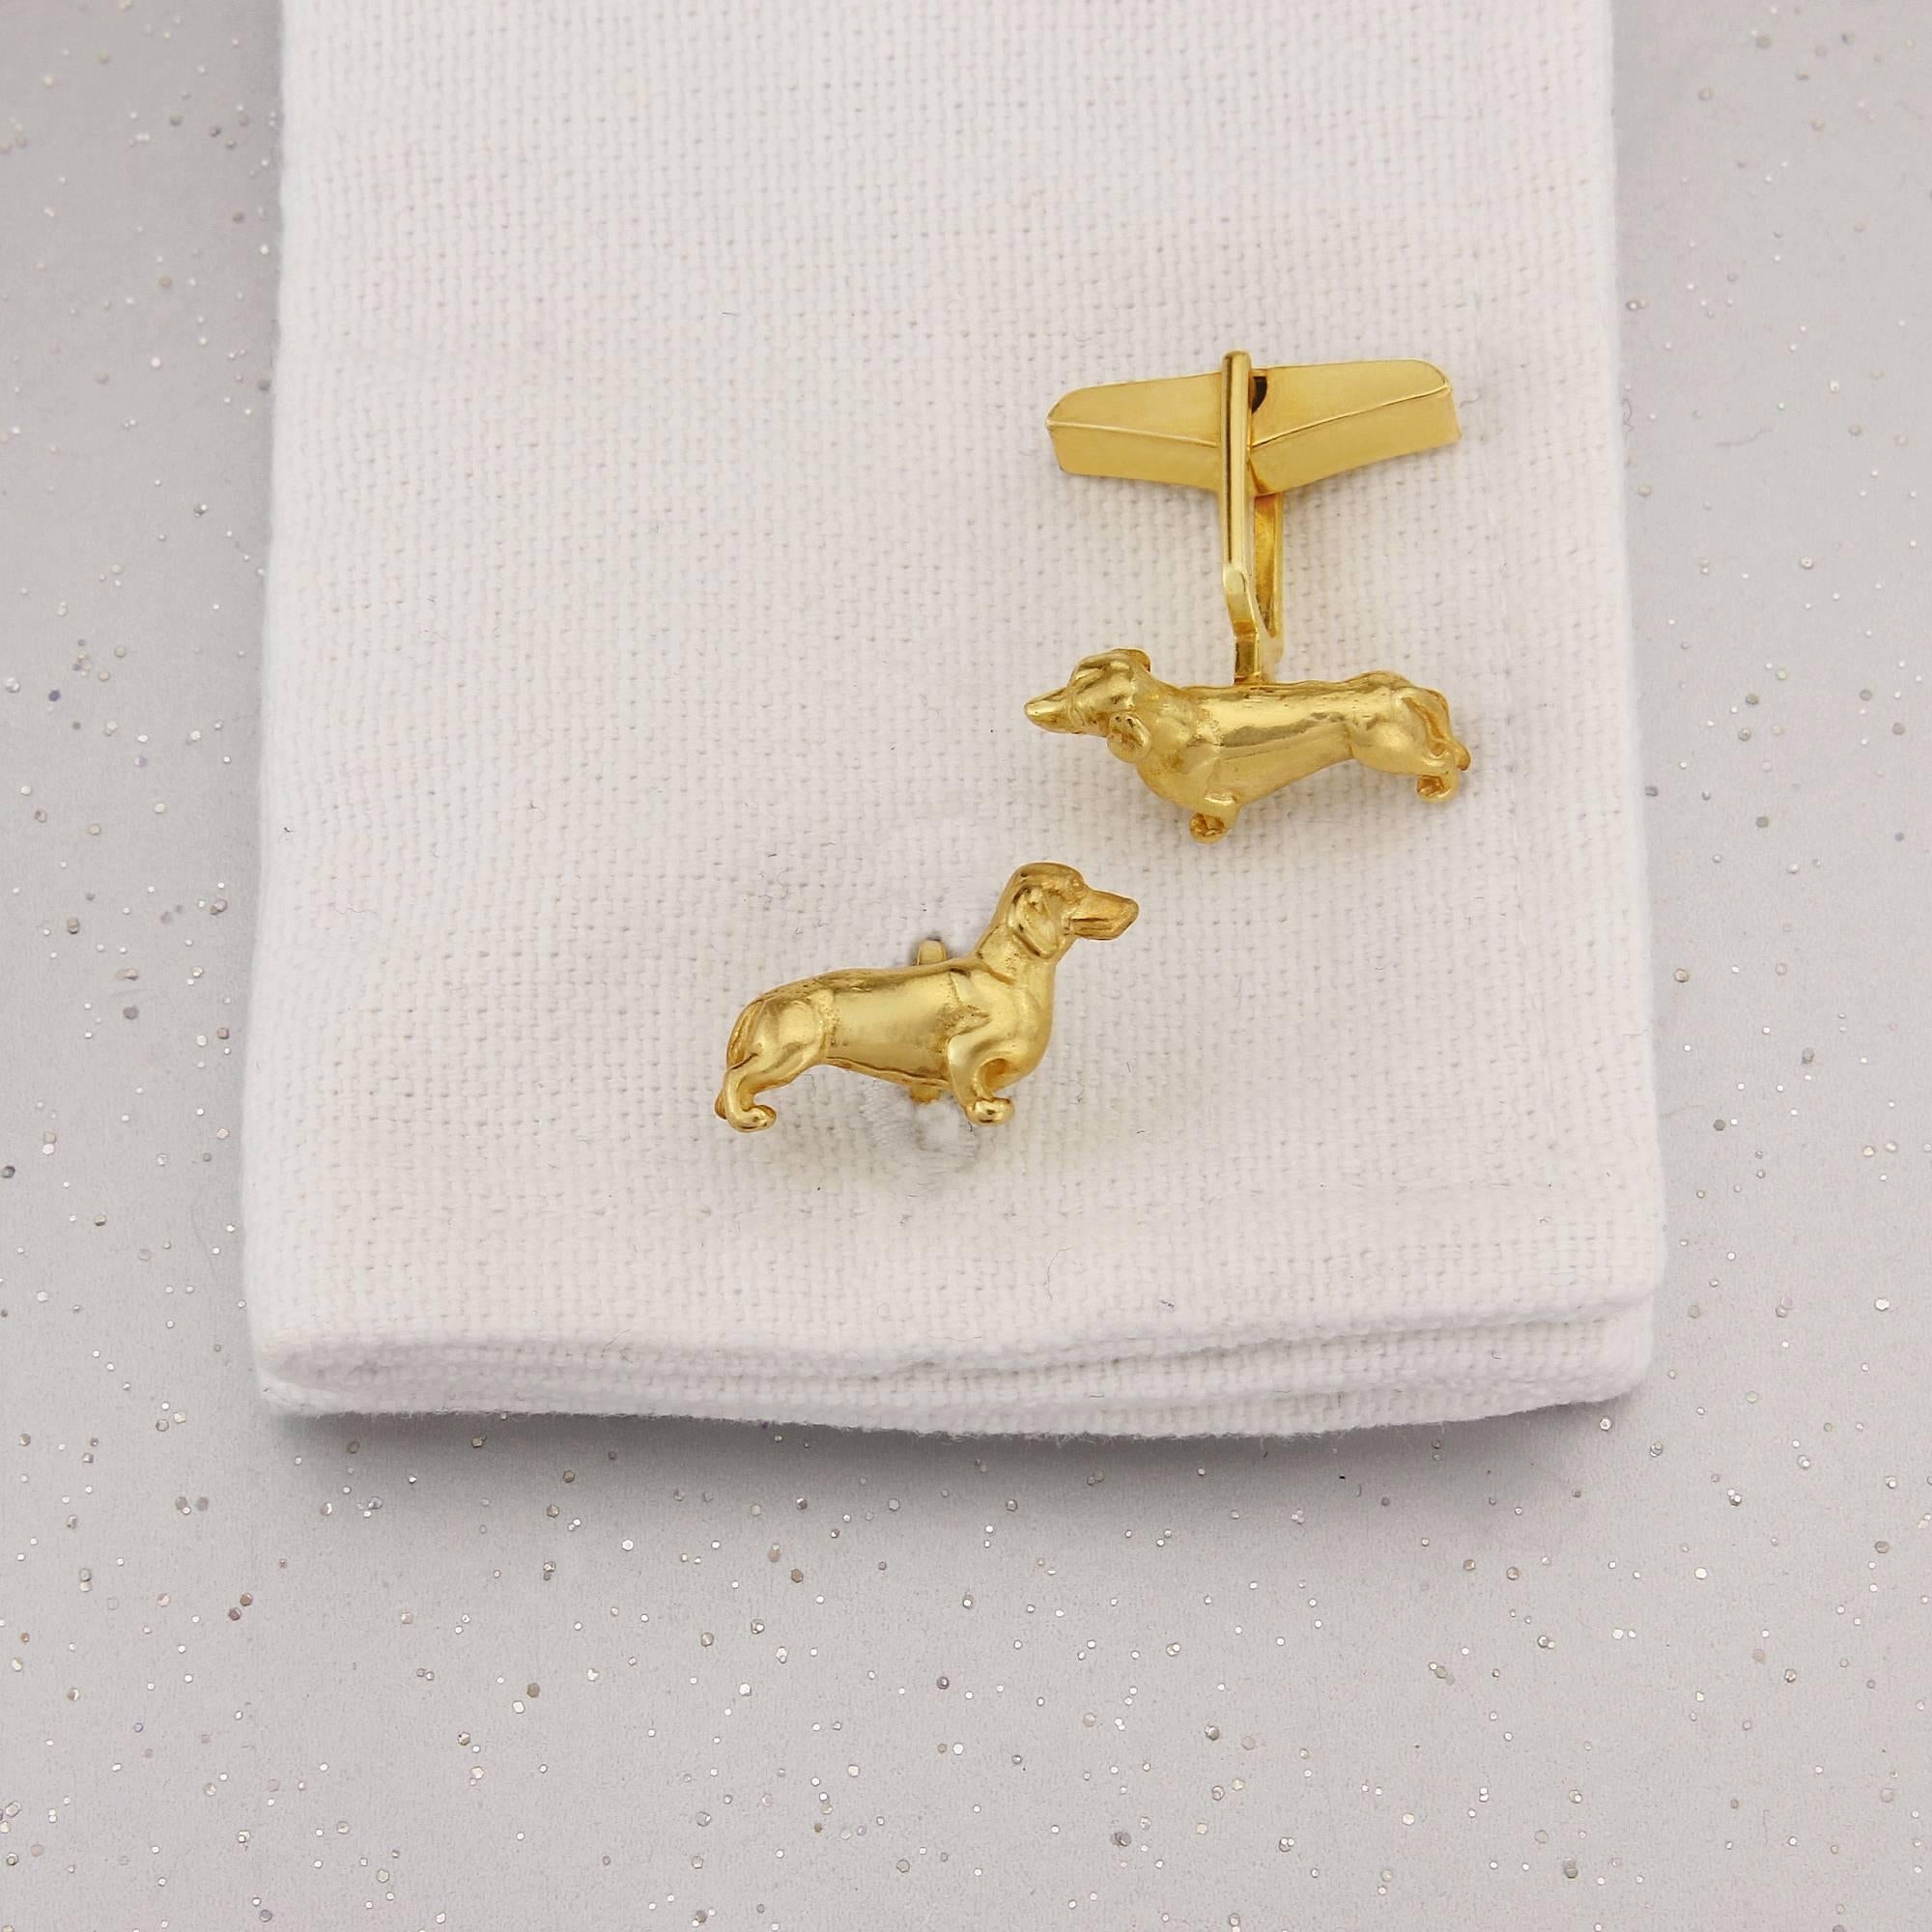 The lovable Dachshund as a stunning pair of cufflinks, made from solid Sterling Silver with a 9 carat Gold layer.
These gorgeous cufflinks are ideal for the discerning gentleman fond of his beloved Dachshund. This realistic mini sculpture is made in